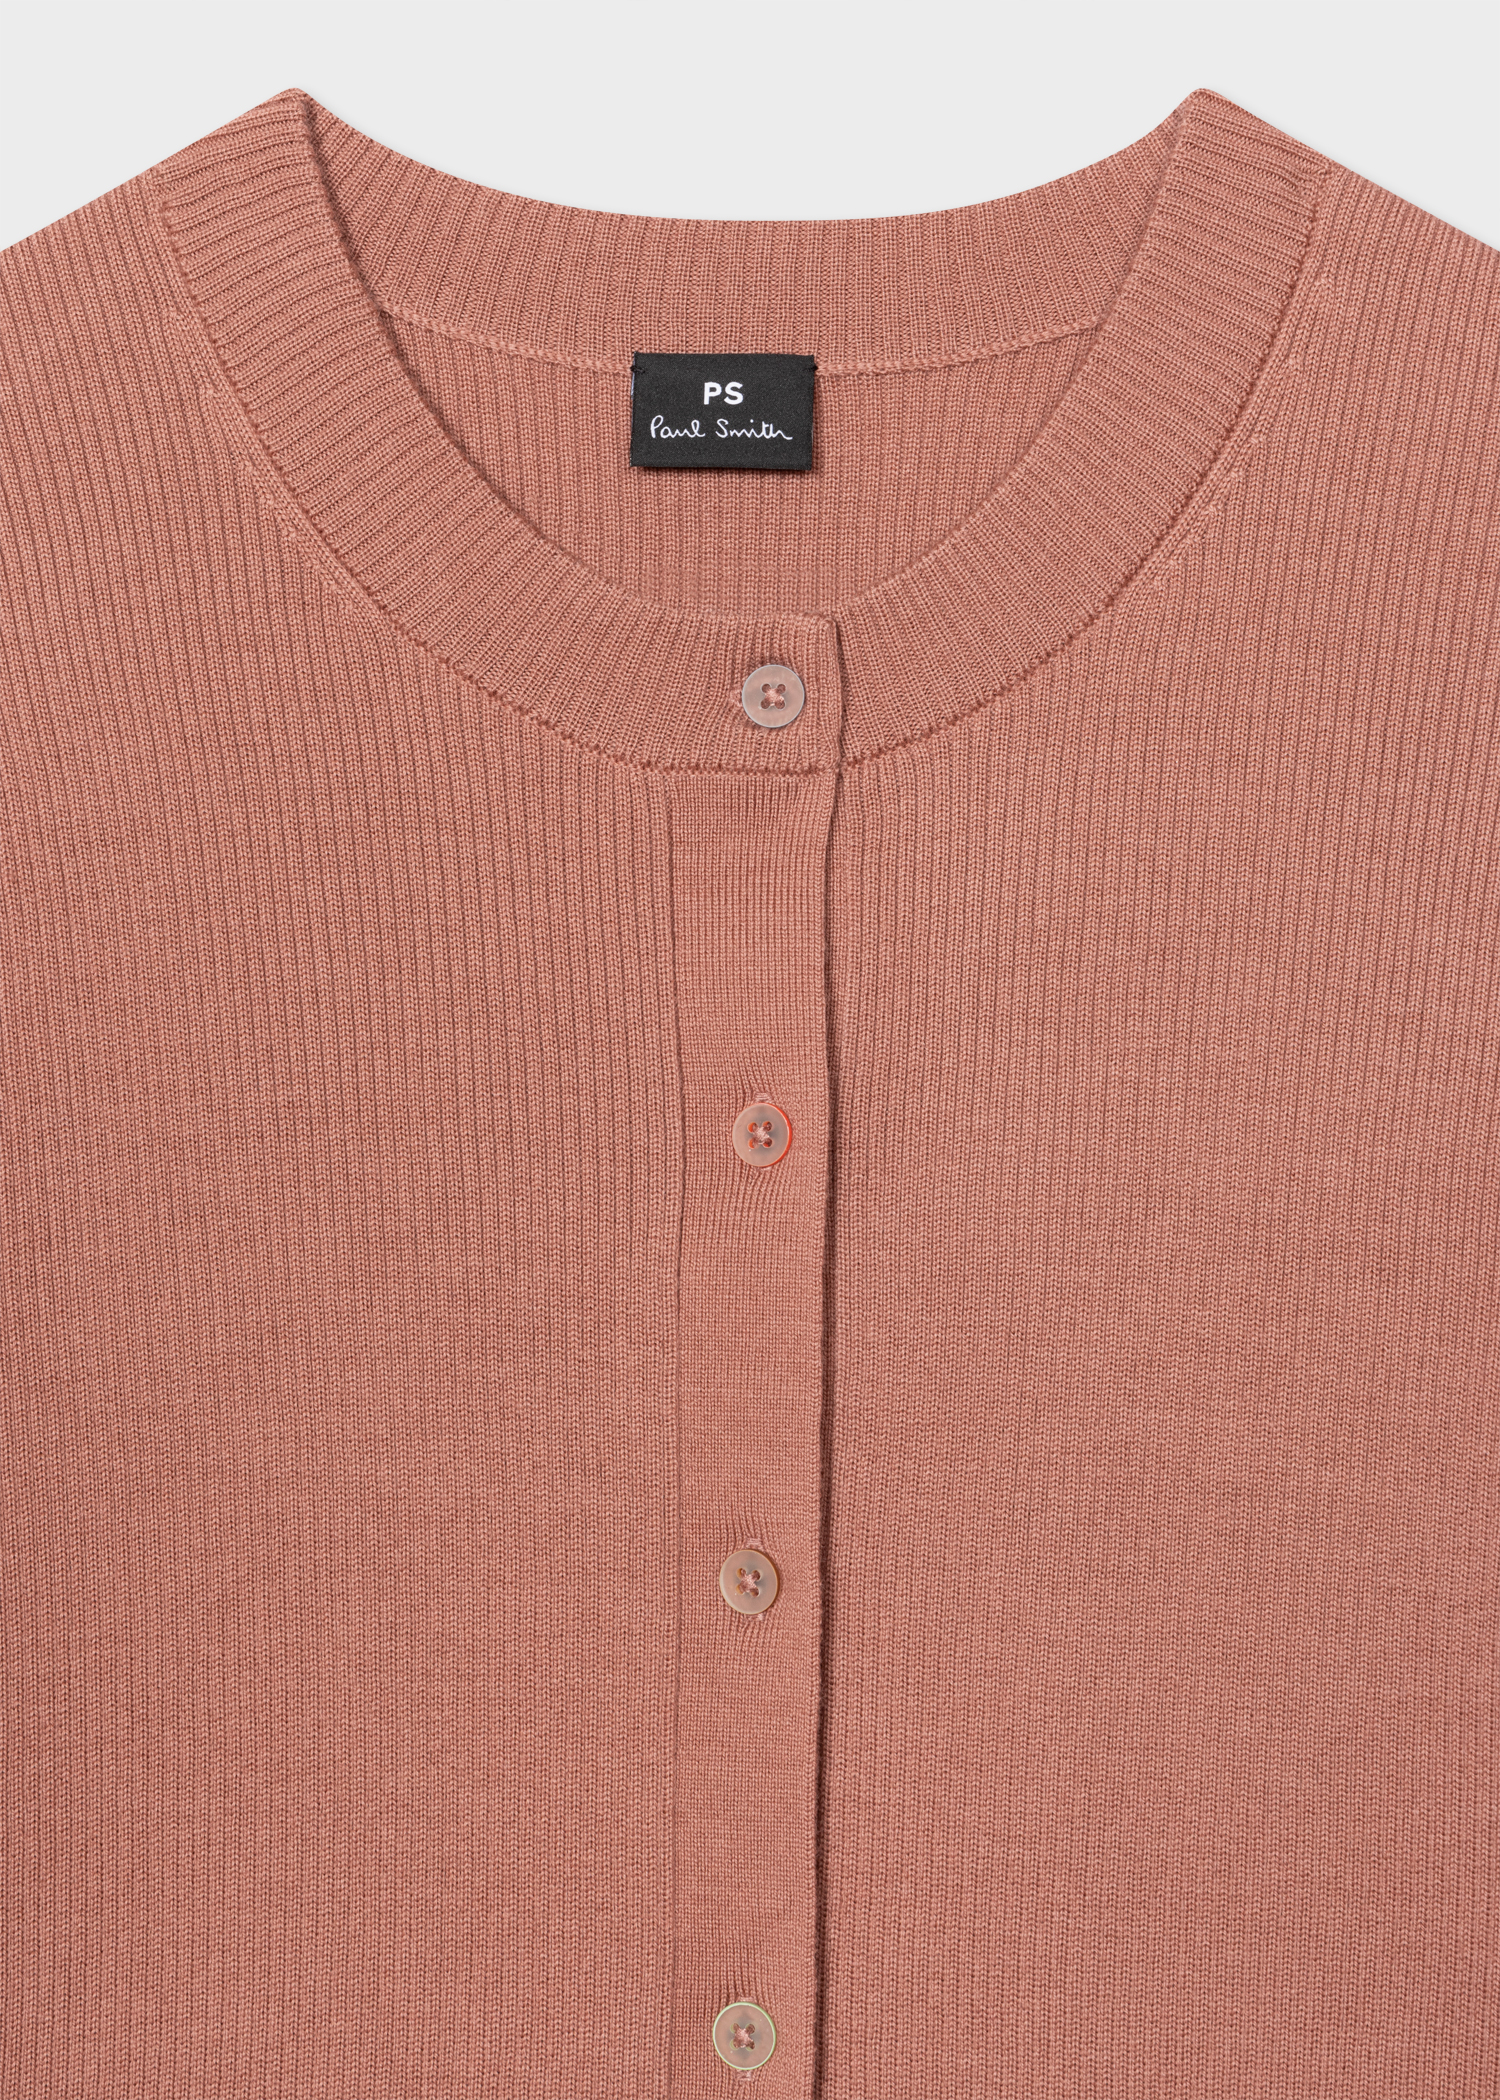 Paul Smith cashmere knitted cardigan - Pink